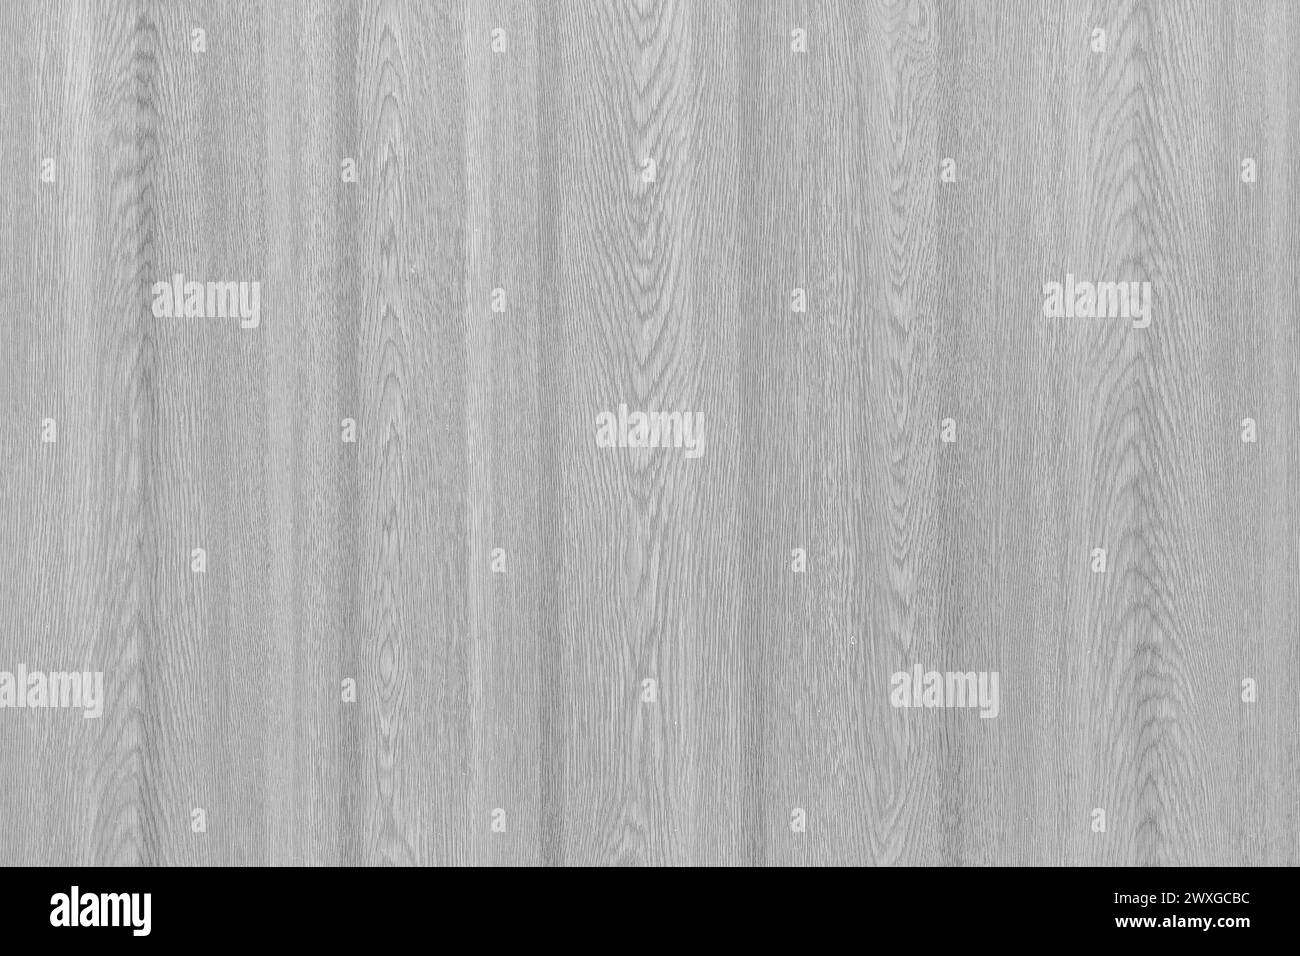 Grey Fence Boards Light Wood Texture Wooden Plank Background. Stock Photo